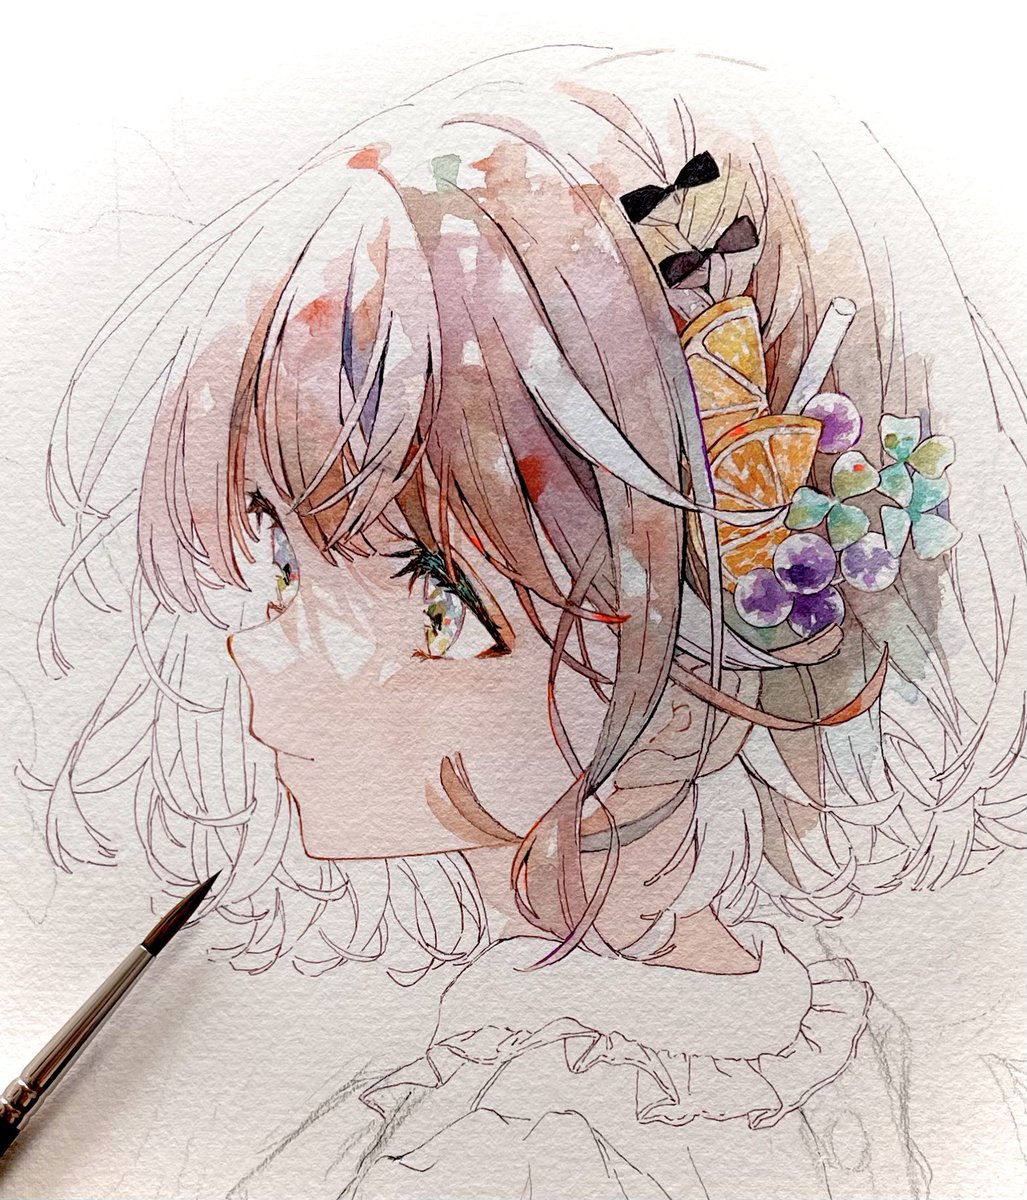 「wip*アナログ #watercolor」|優子鈴(ゆこりん)◆初画集4/24のイラスト